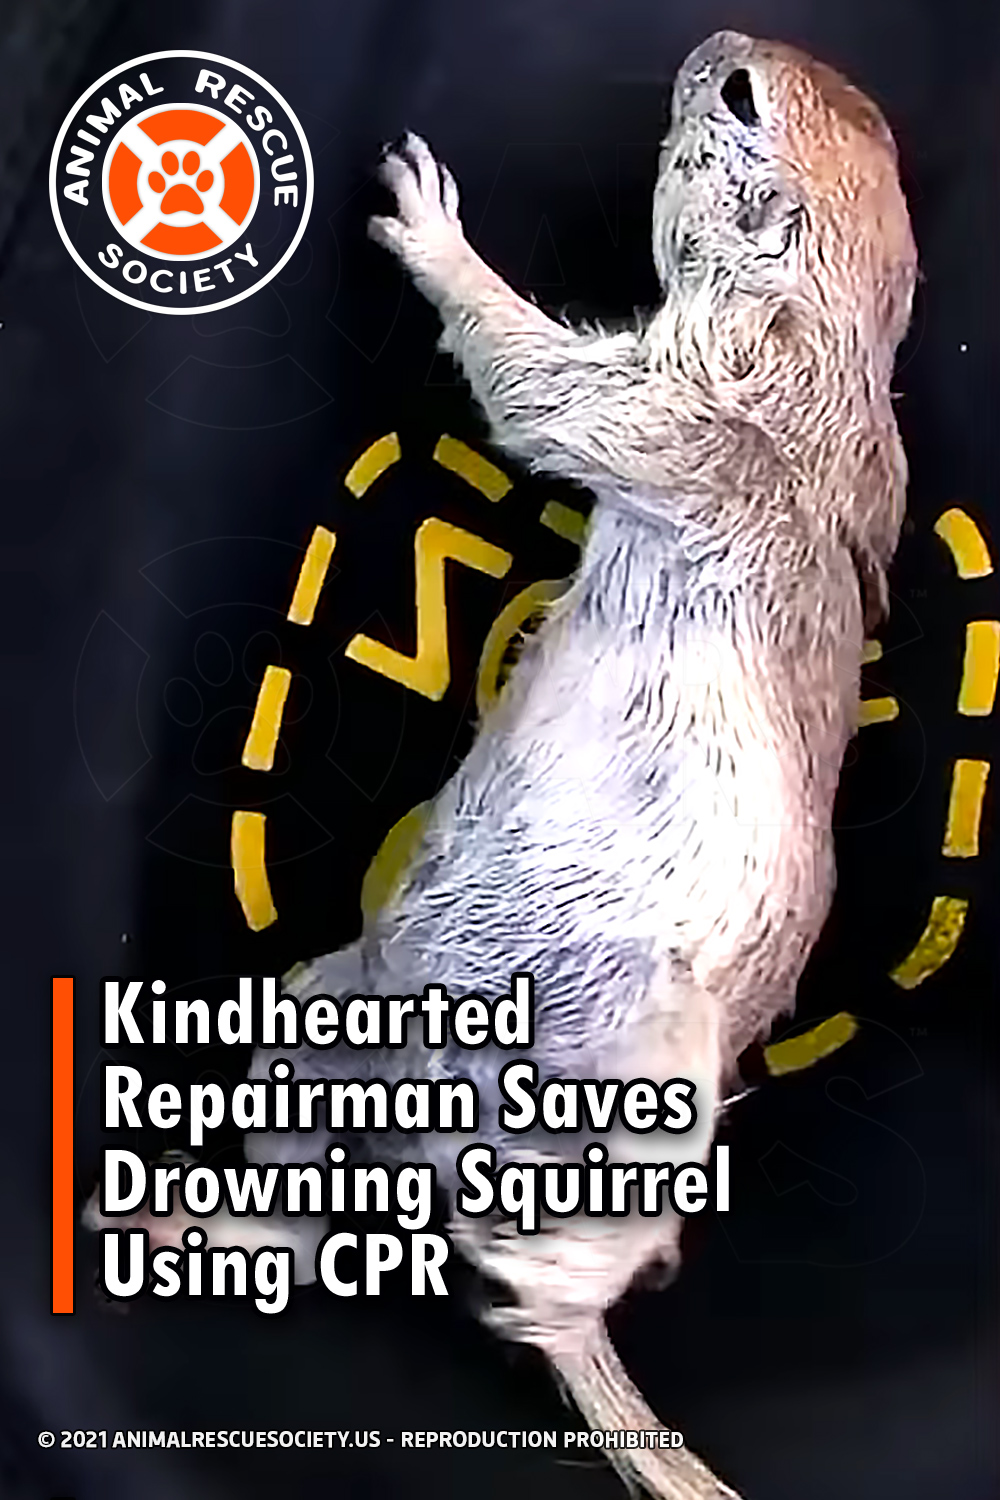 Kindhearted Repairman Saves Drowning Squirrel Using CPR